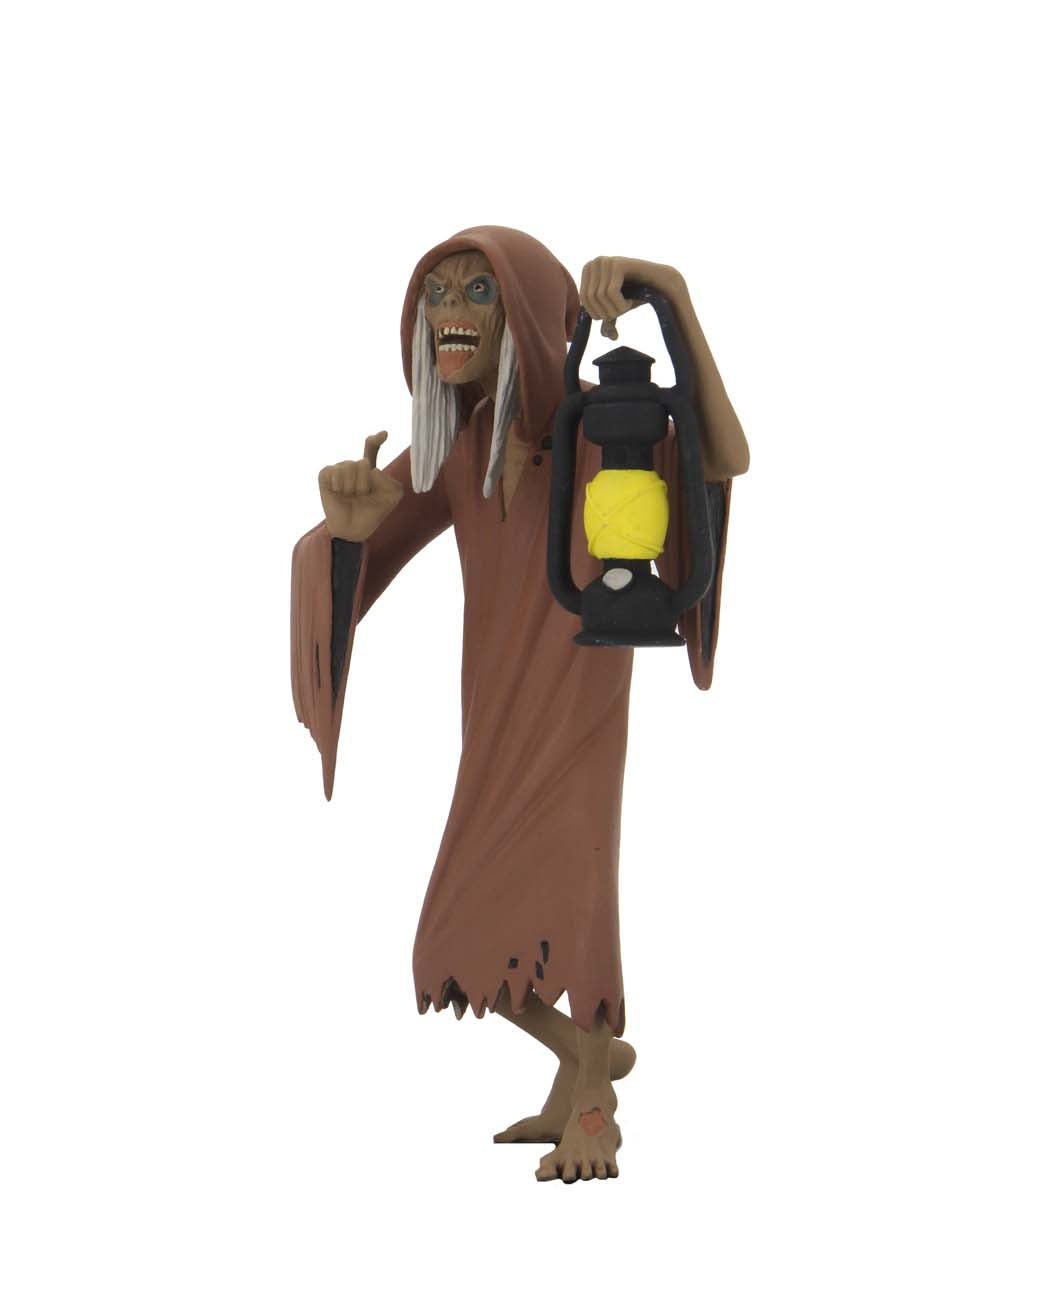 This is NECA Toony Terror Series 5 Creepshow Creep and he has white hair, is wearing a brown nightgown, is barefoot and is holding a lantern.